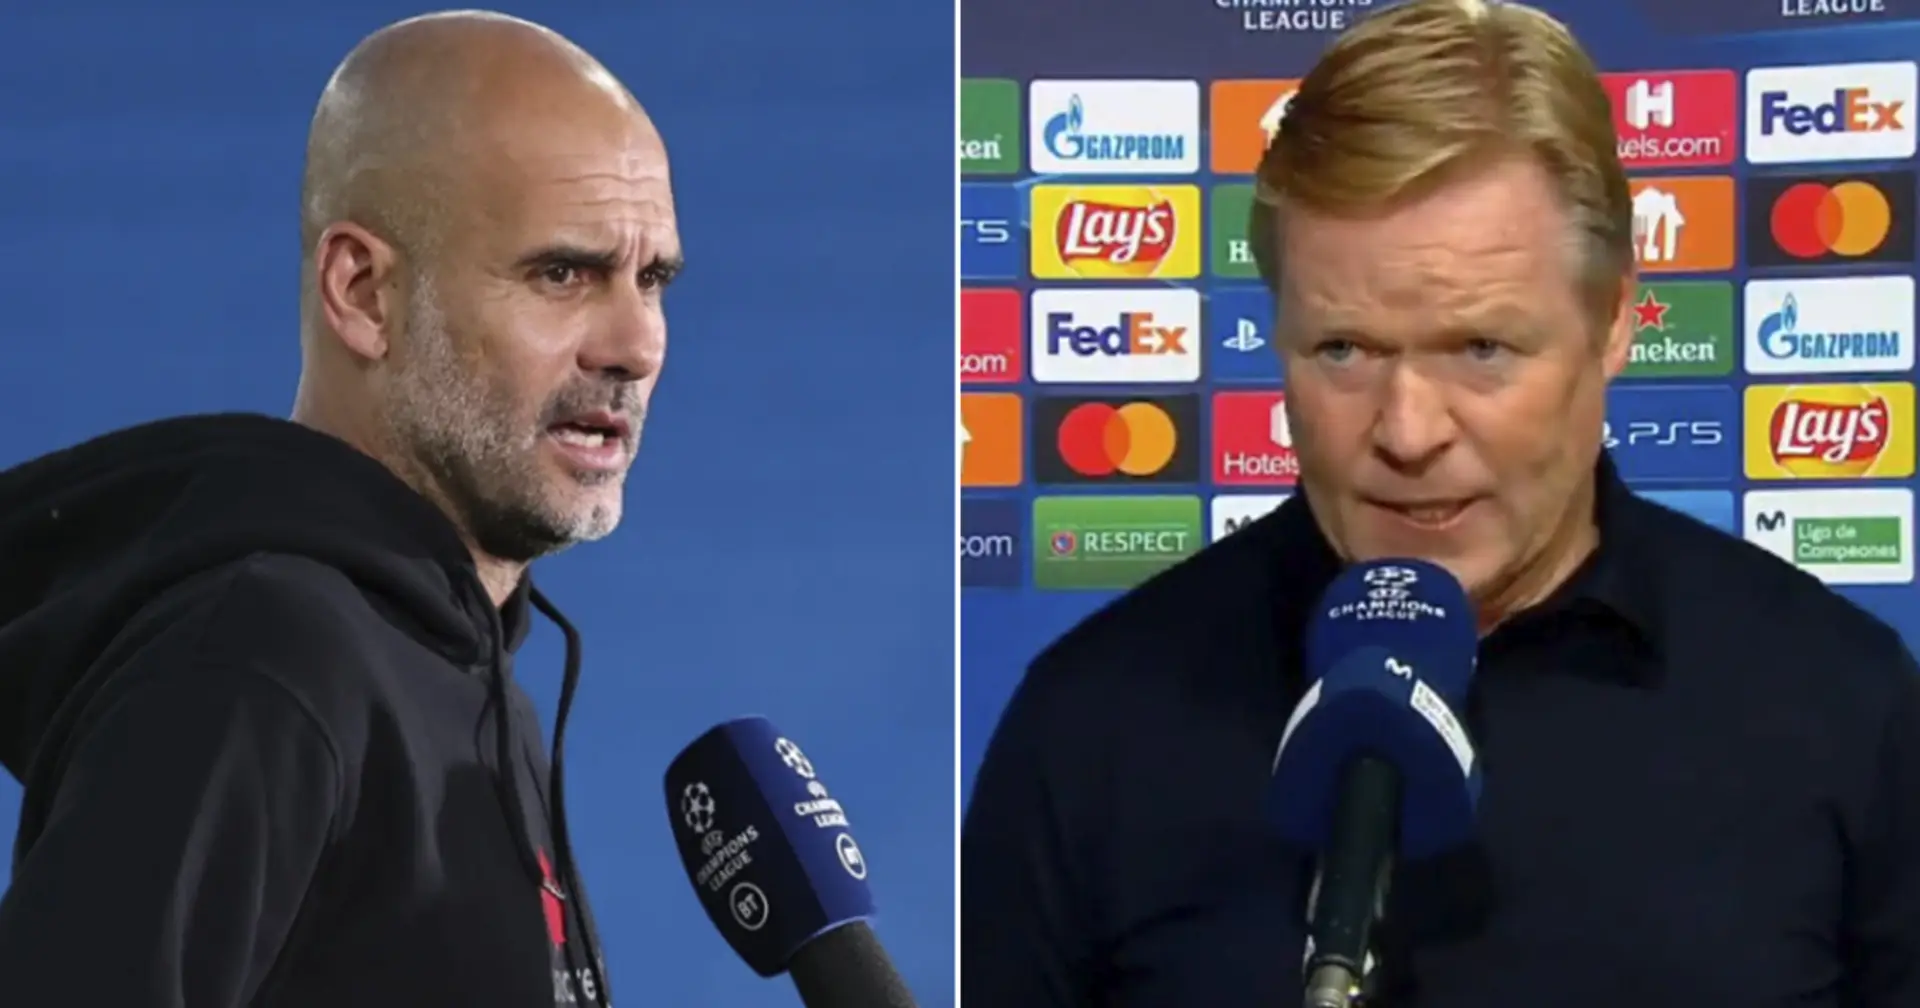 One new name emerges on list of Koeman's possible replacements – he's related to Pep Guardiola